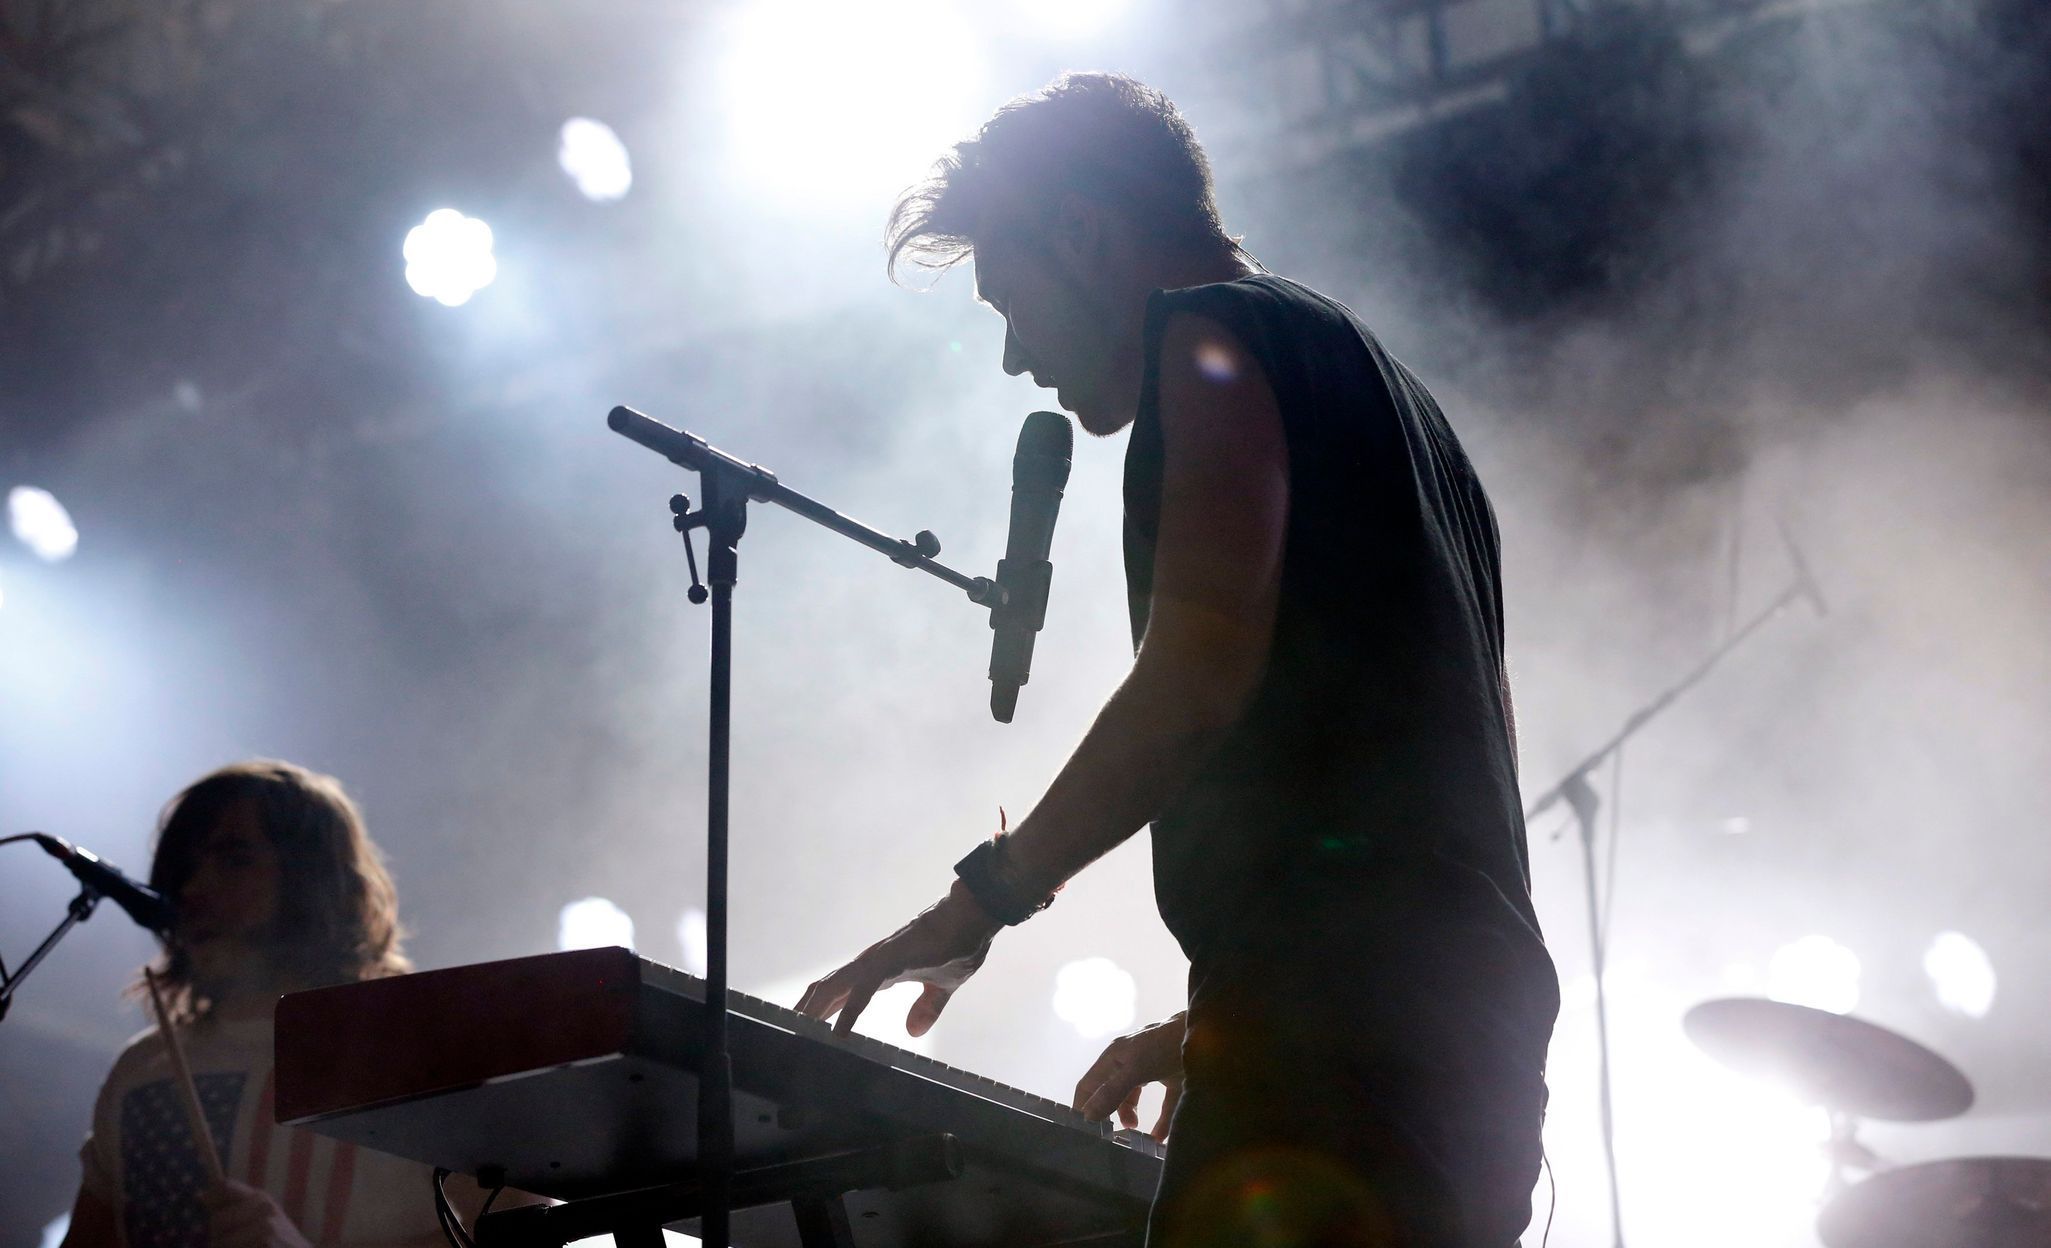 Lead vocalist Dan Smith of rock band Bastille performs at the Coachella Music Festival in Indio